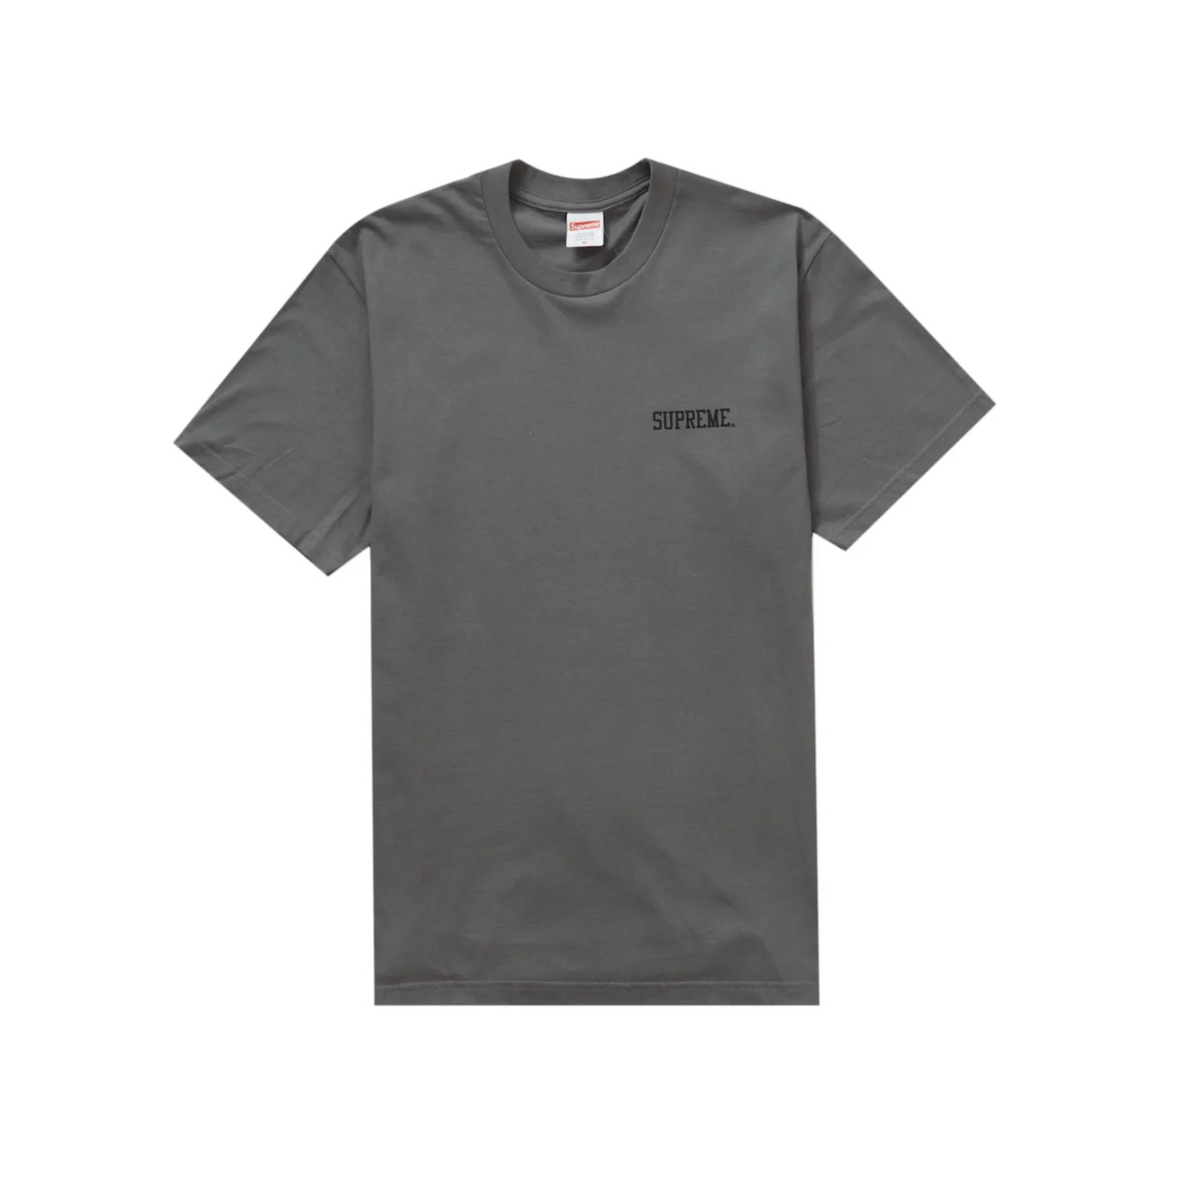 Supreme Fighter T-shirt "Charcoal"